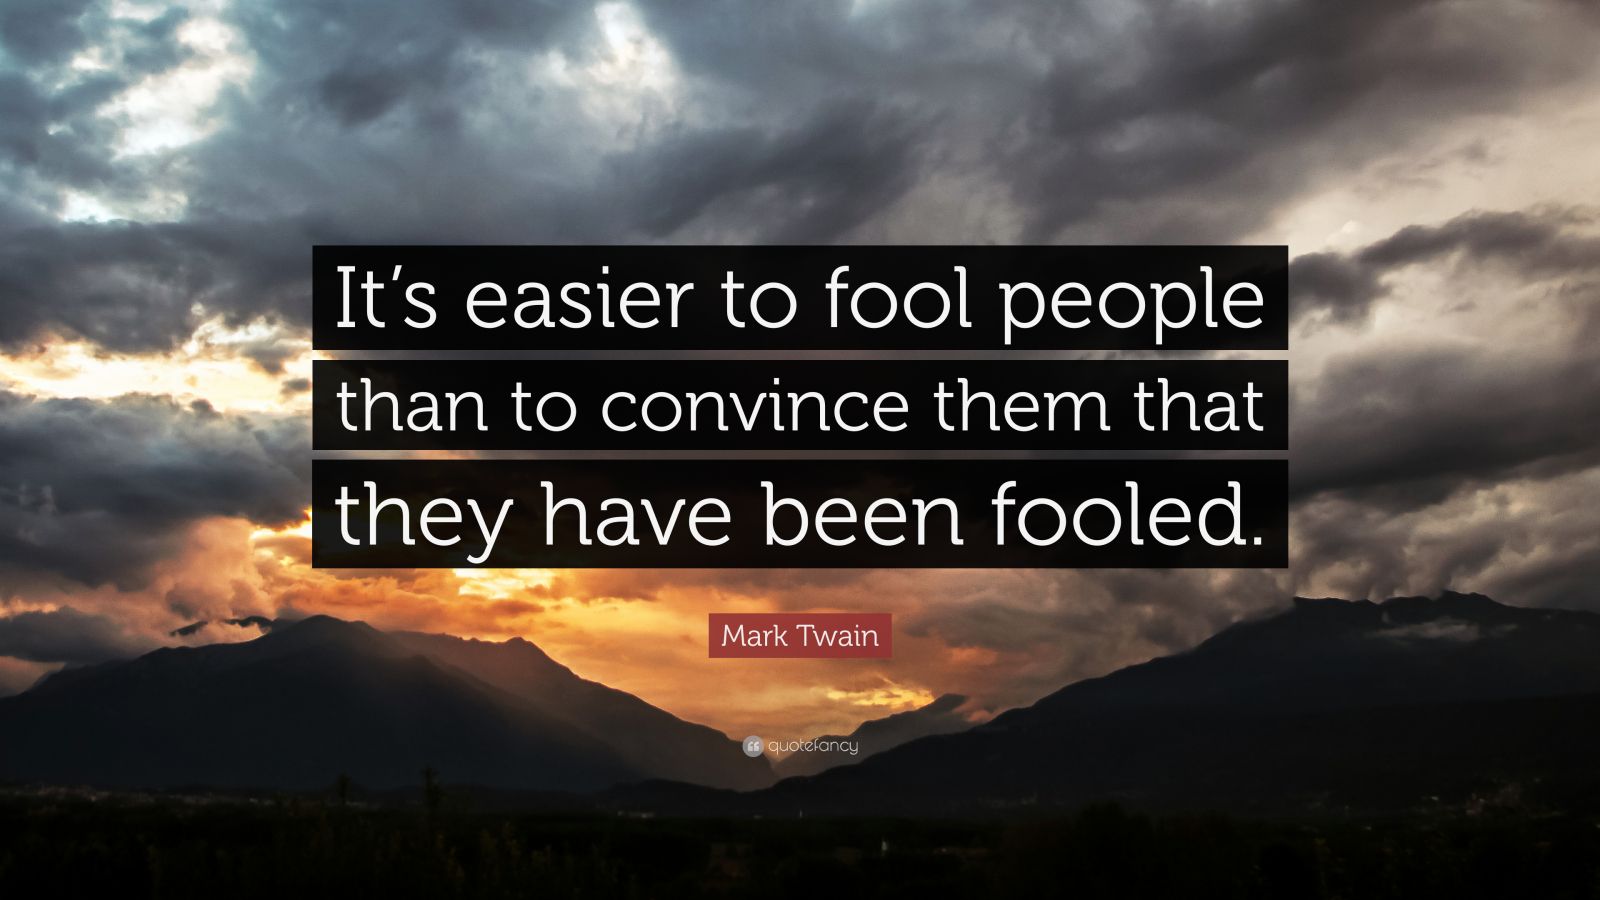 Mark Twain Quote: “It’s easier to fool people than to convince them ...